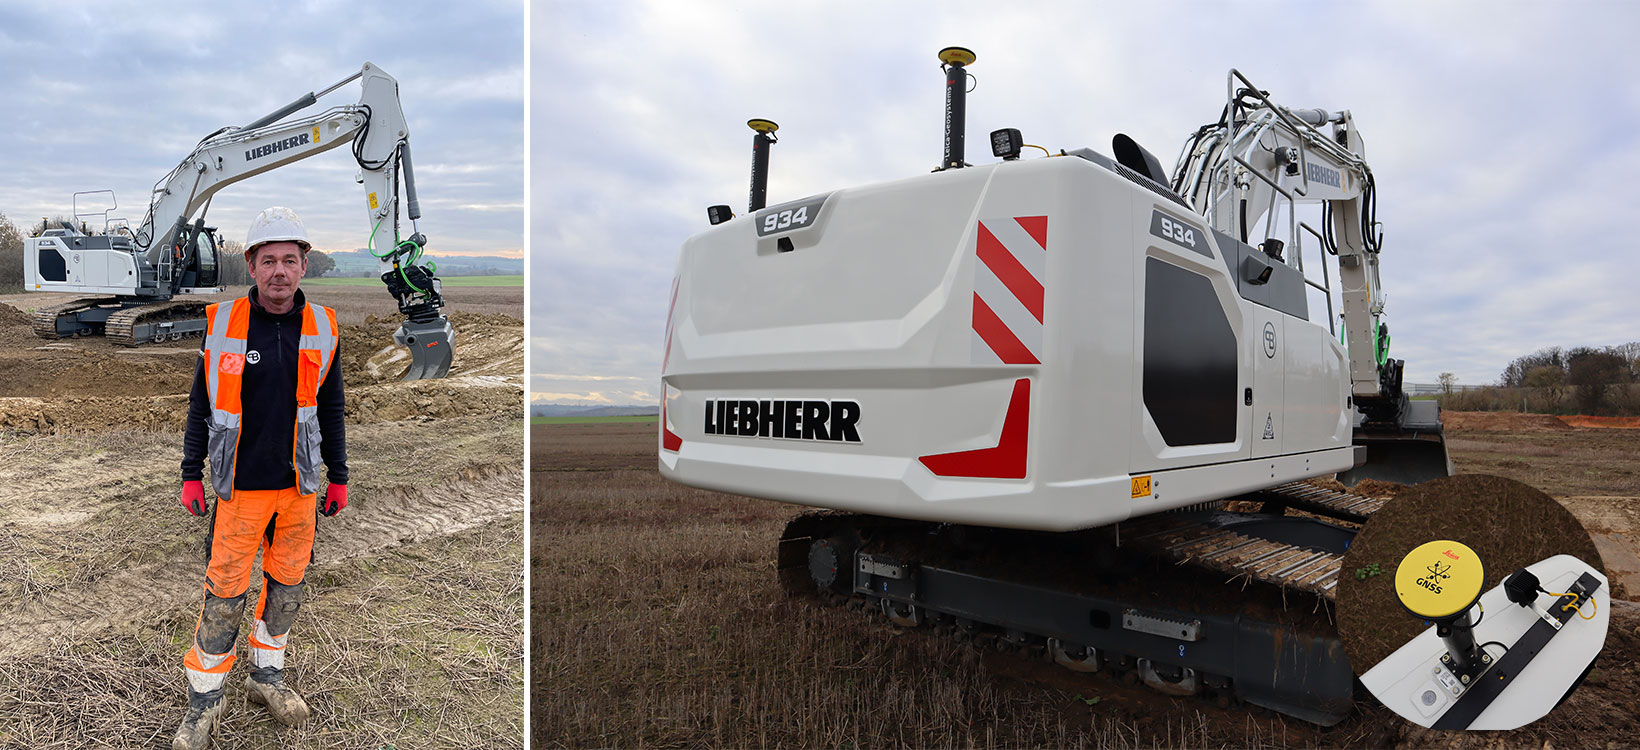 World’s first Liebherr crawler excavator to be offered with factory-fitted Leica Geosystems machine control technology